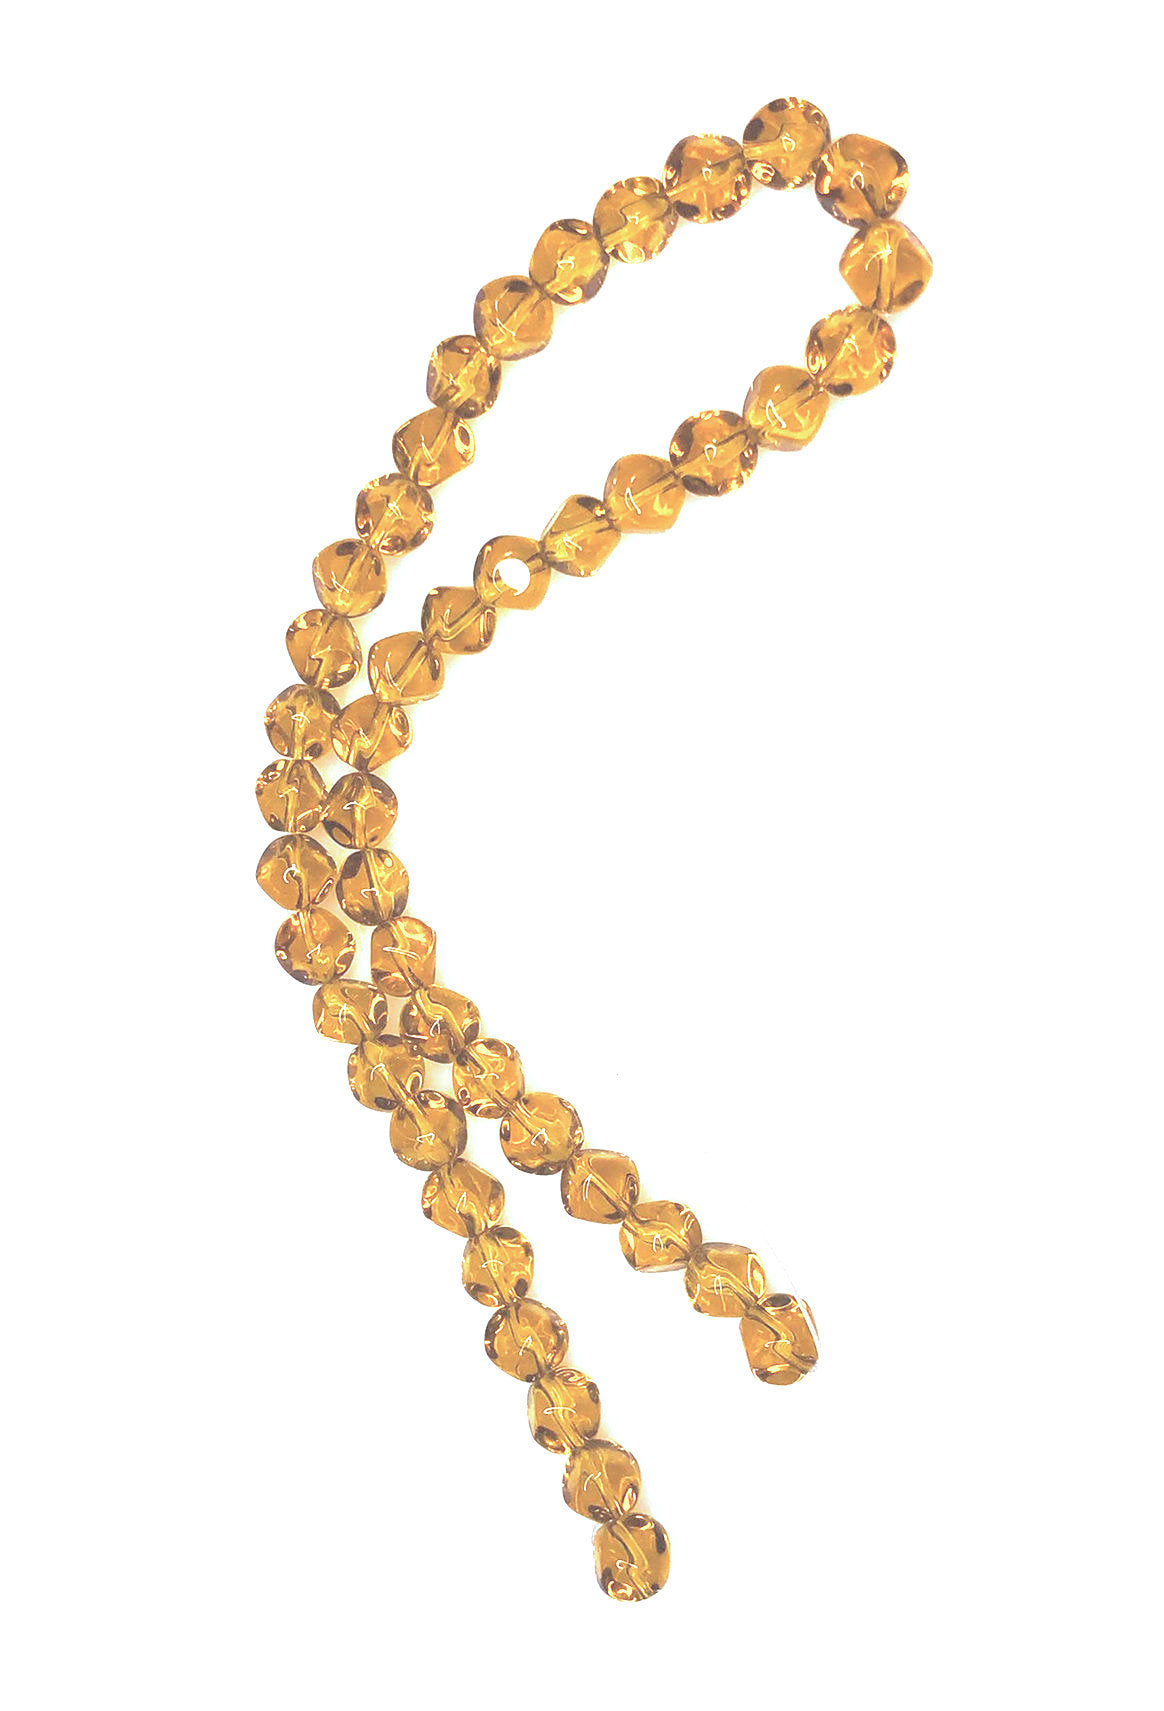 Transparent Topaz / Brown Twisted Round Glass Beads, 8 mm - 12-Inch Strand